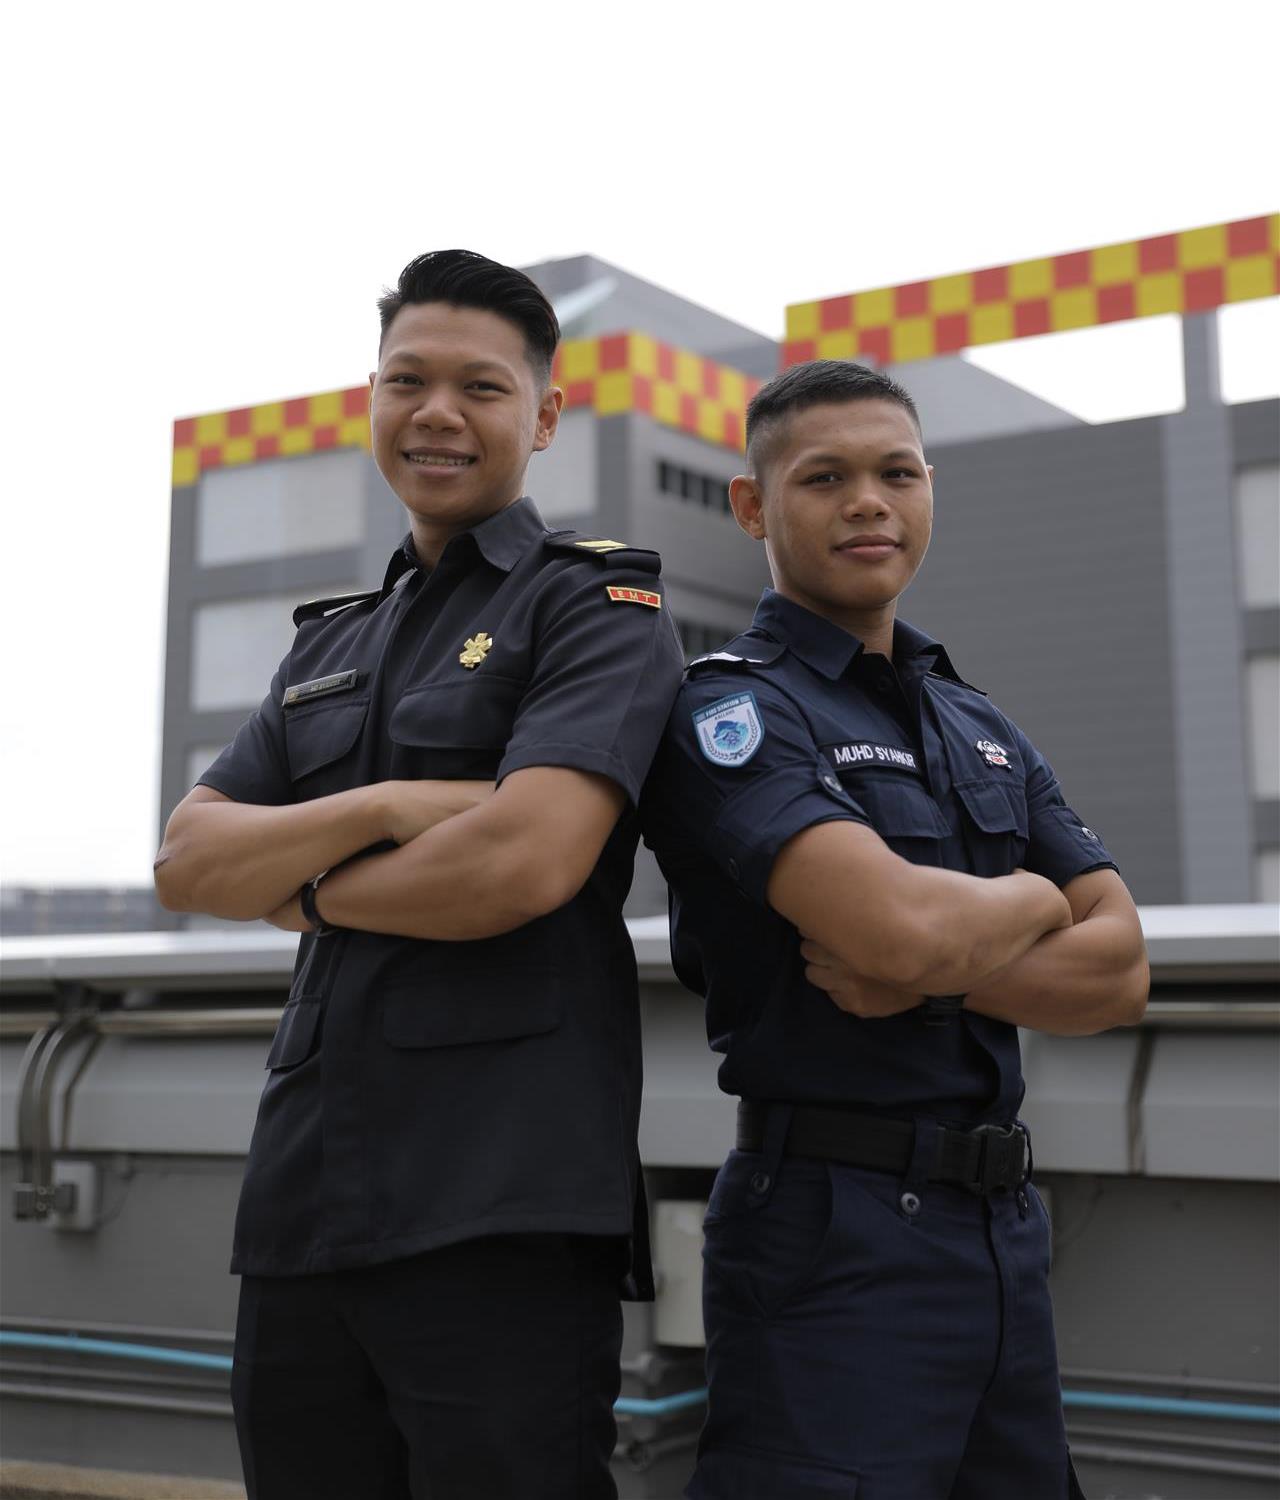 SGT3 Syahrir (left) is an Emergency Medical Technician section commander from Yishun Fire Station while SGT2 Syahkir (right) is a Fire & Rescue Specialist from Kallang Fire Station.